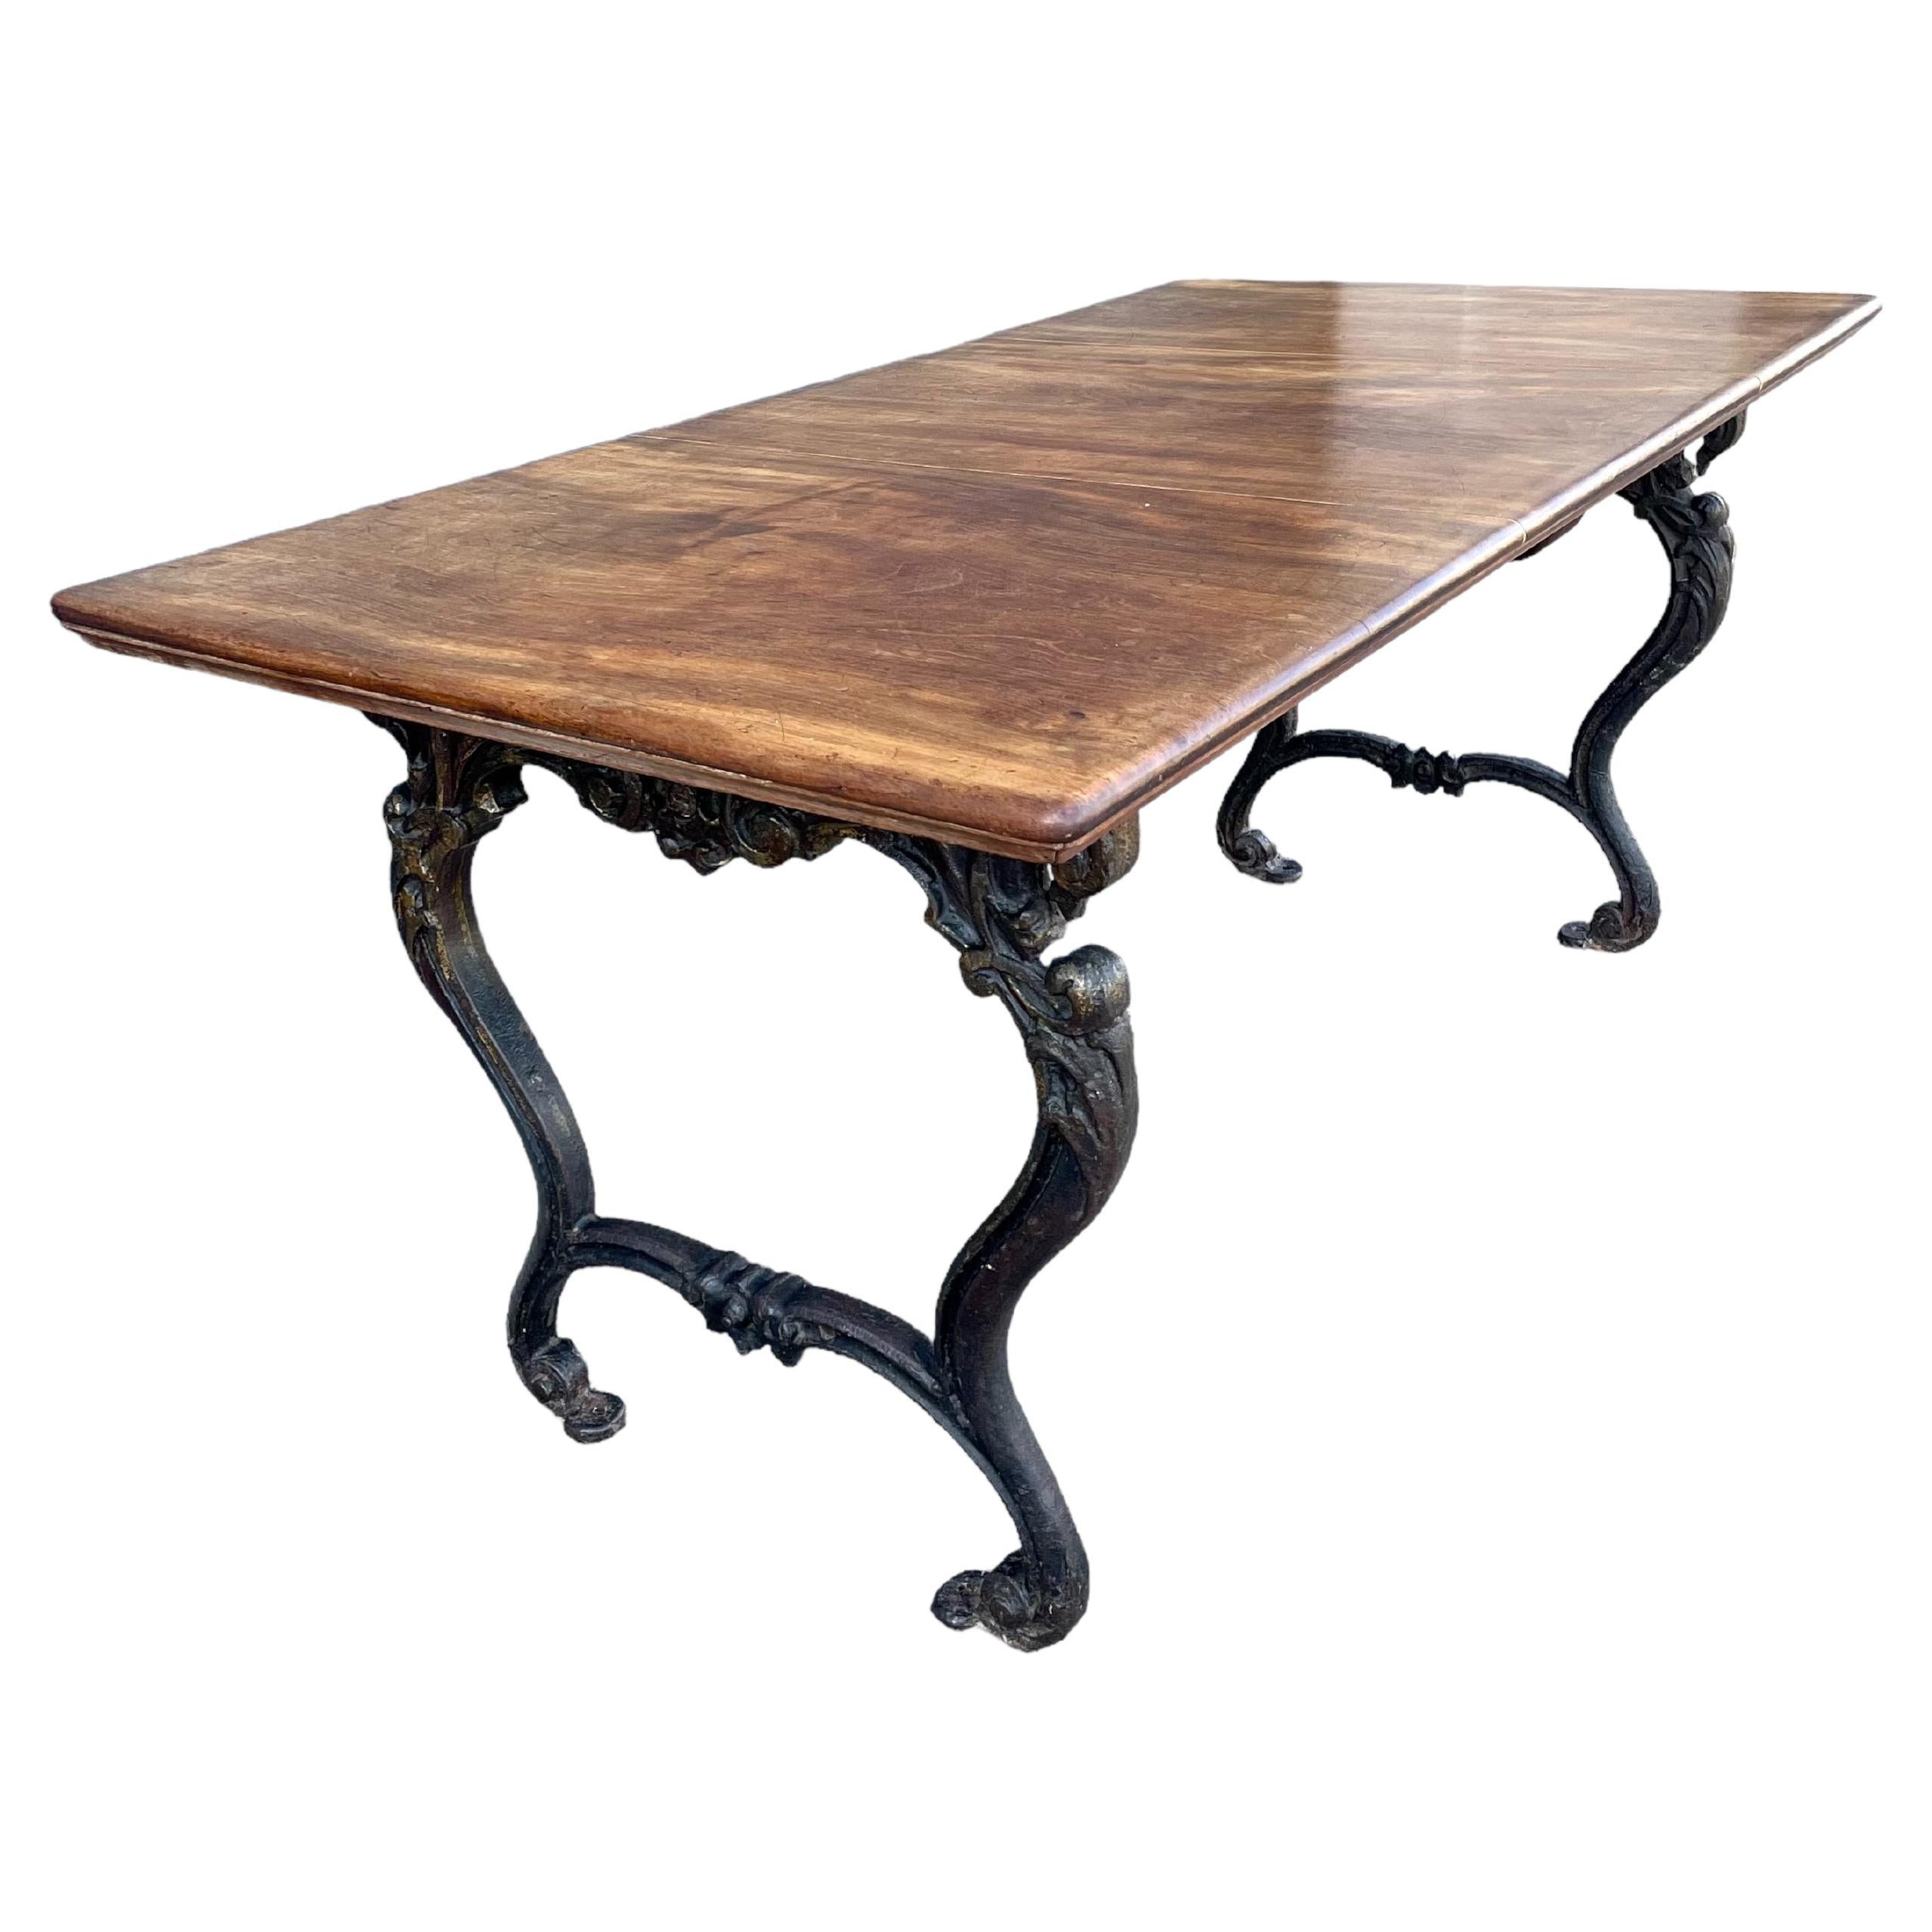 Antique Dining Table with Cast Iron Legs and Walnut Top